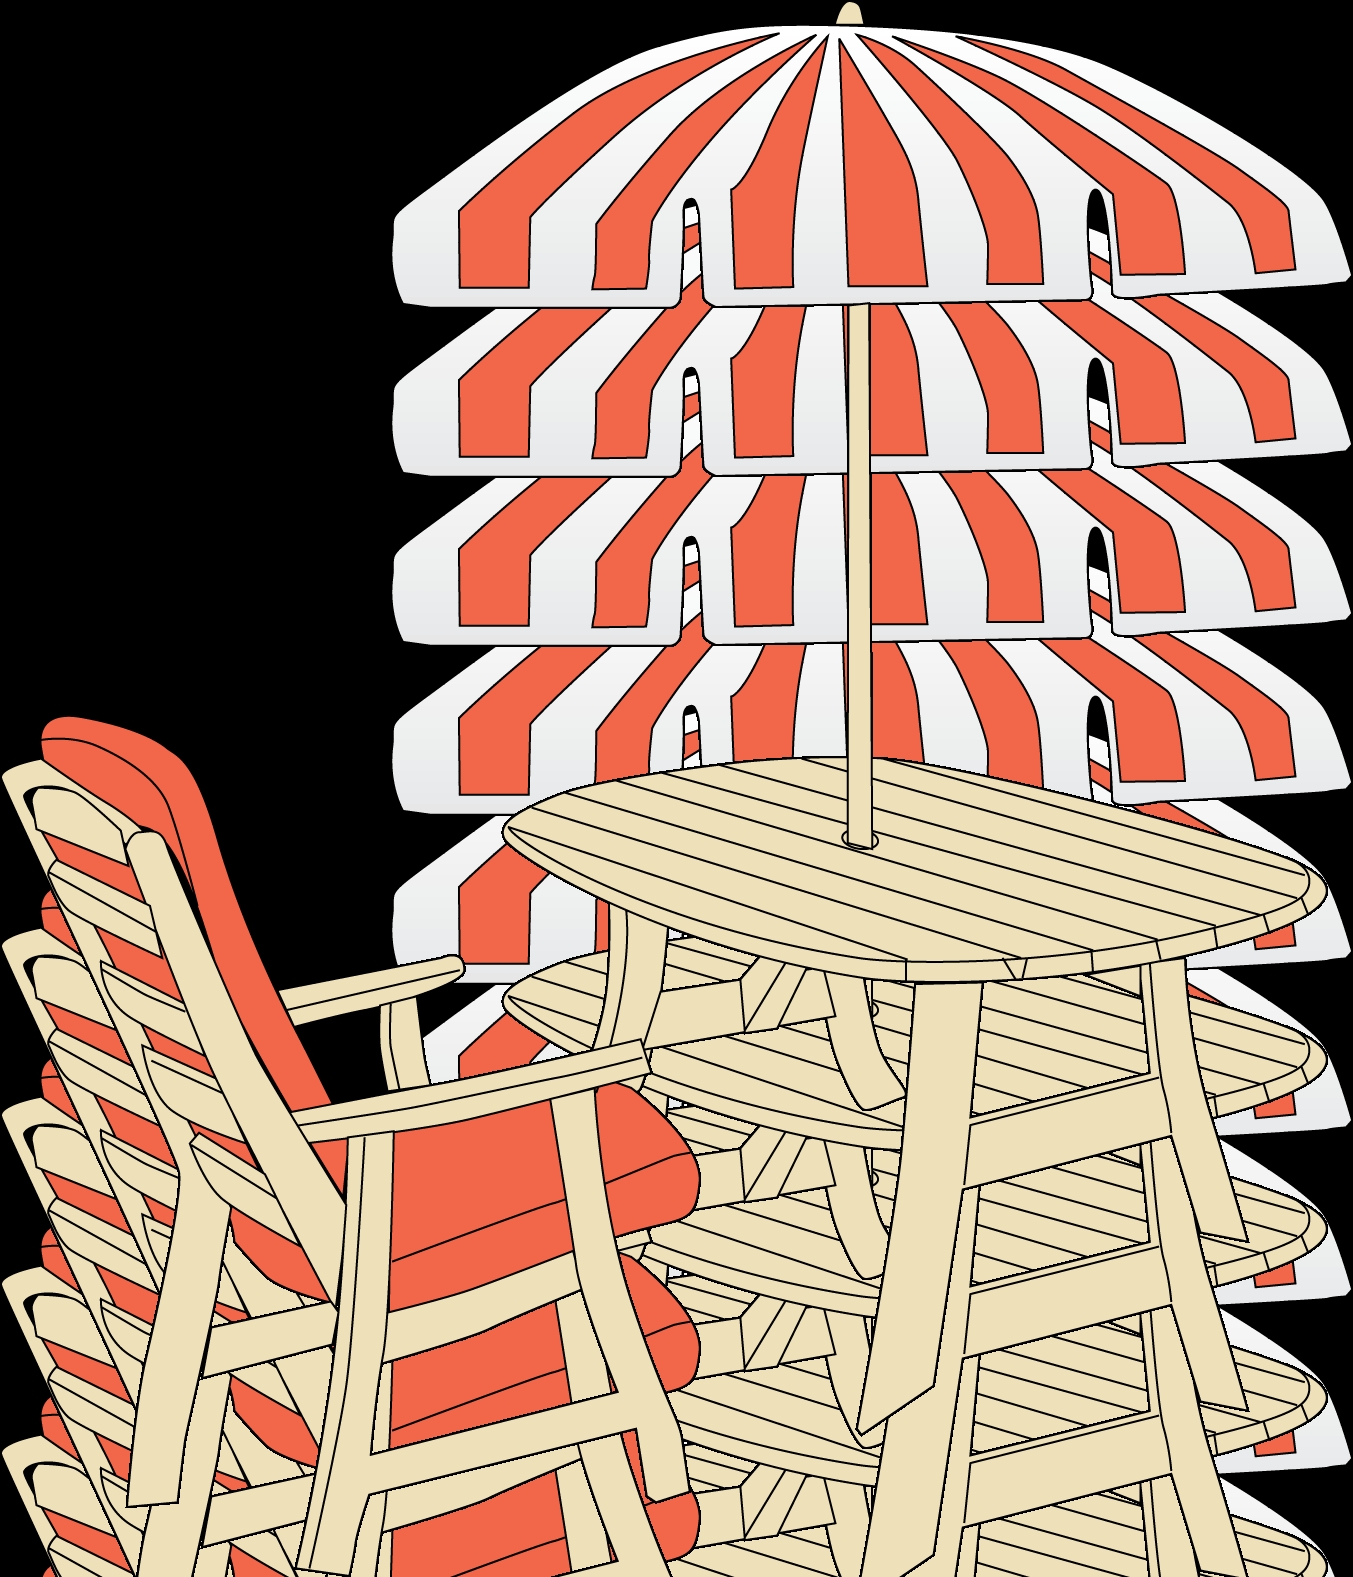 Chairs : Beach Chair Image Clipart.co Intended For Lawn Chair